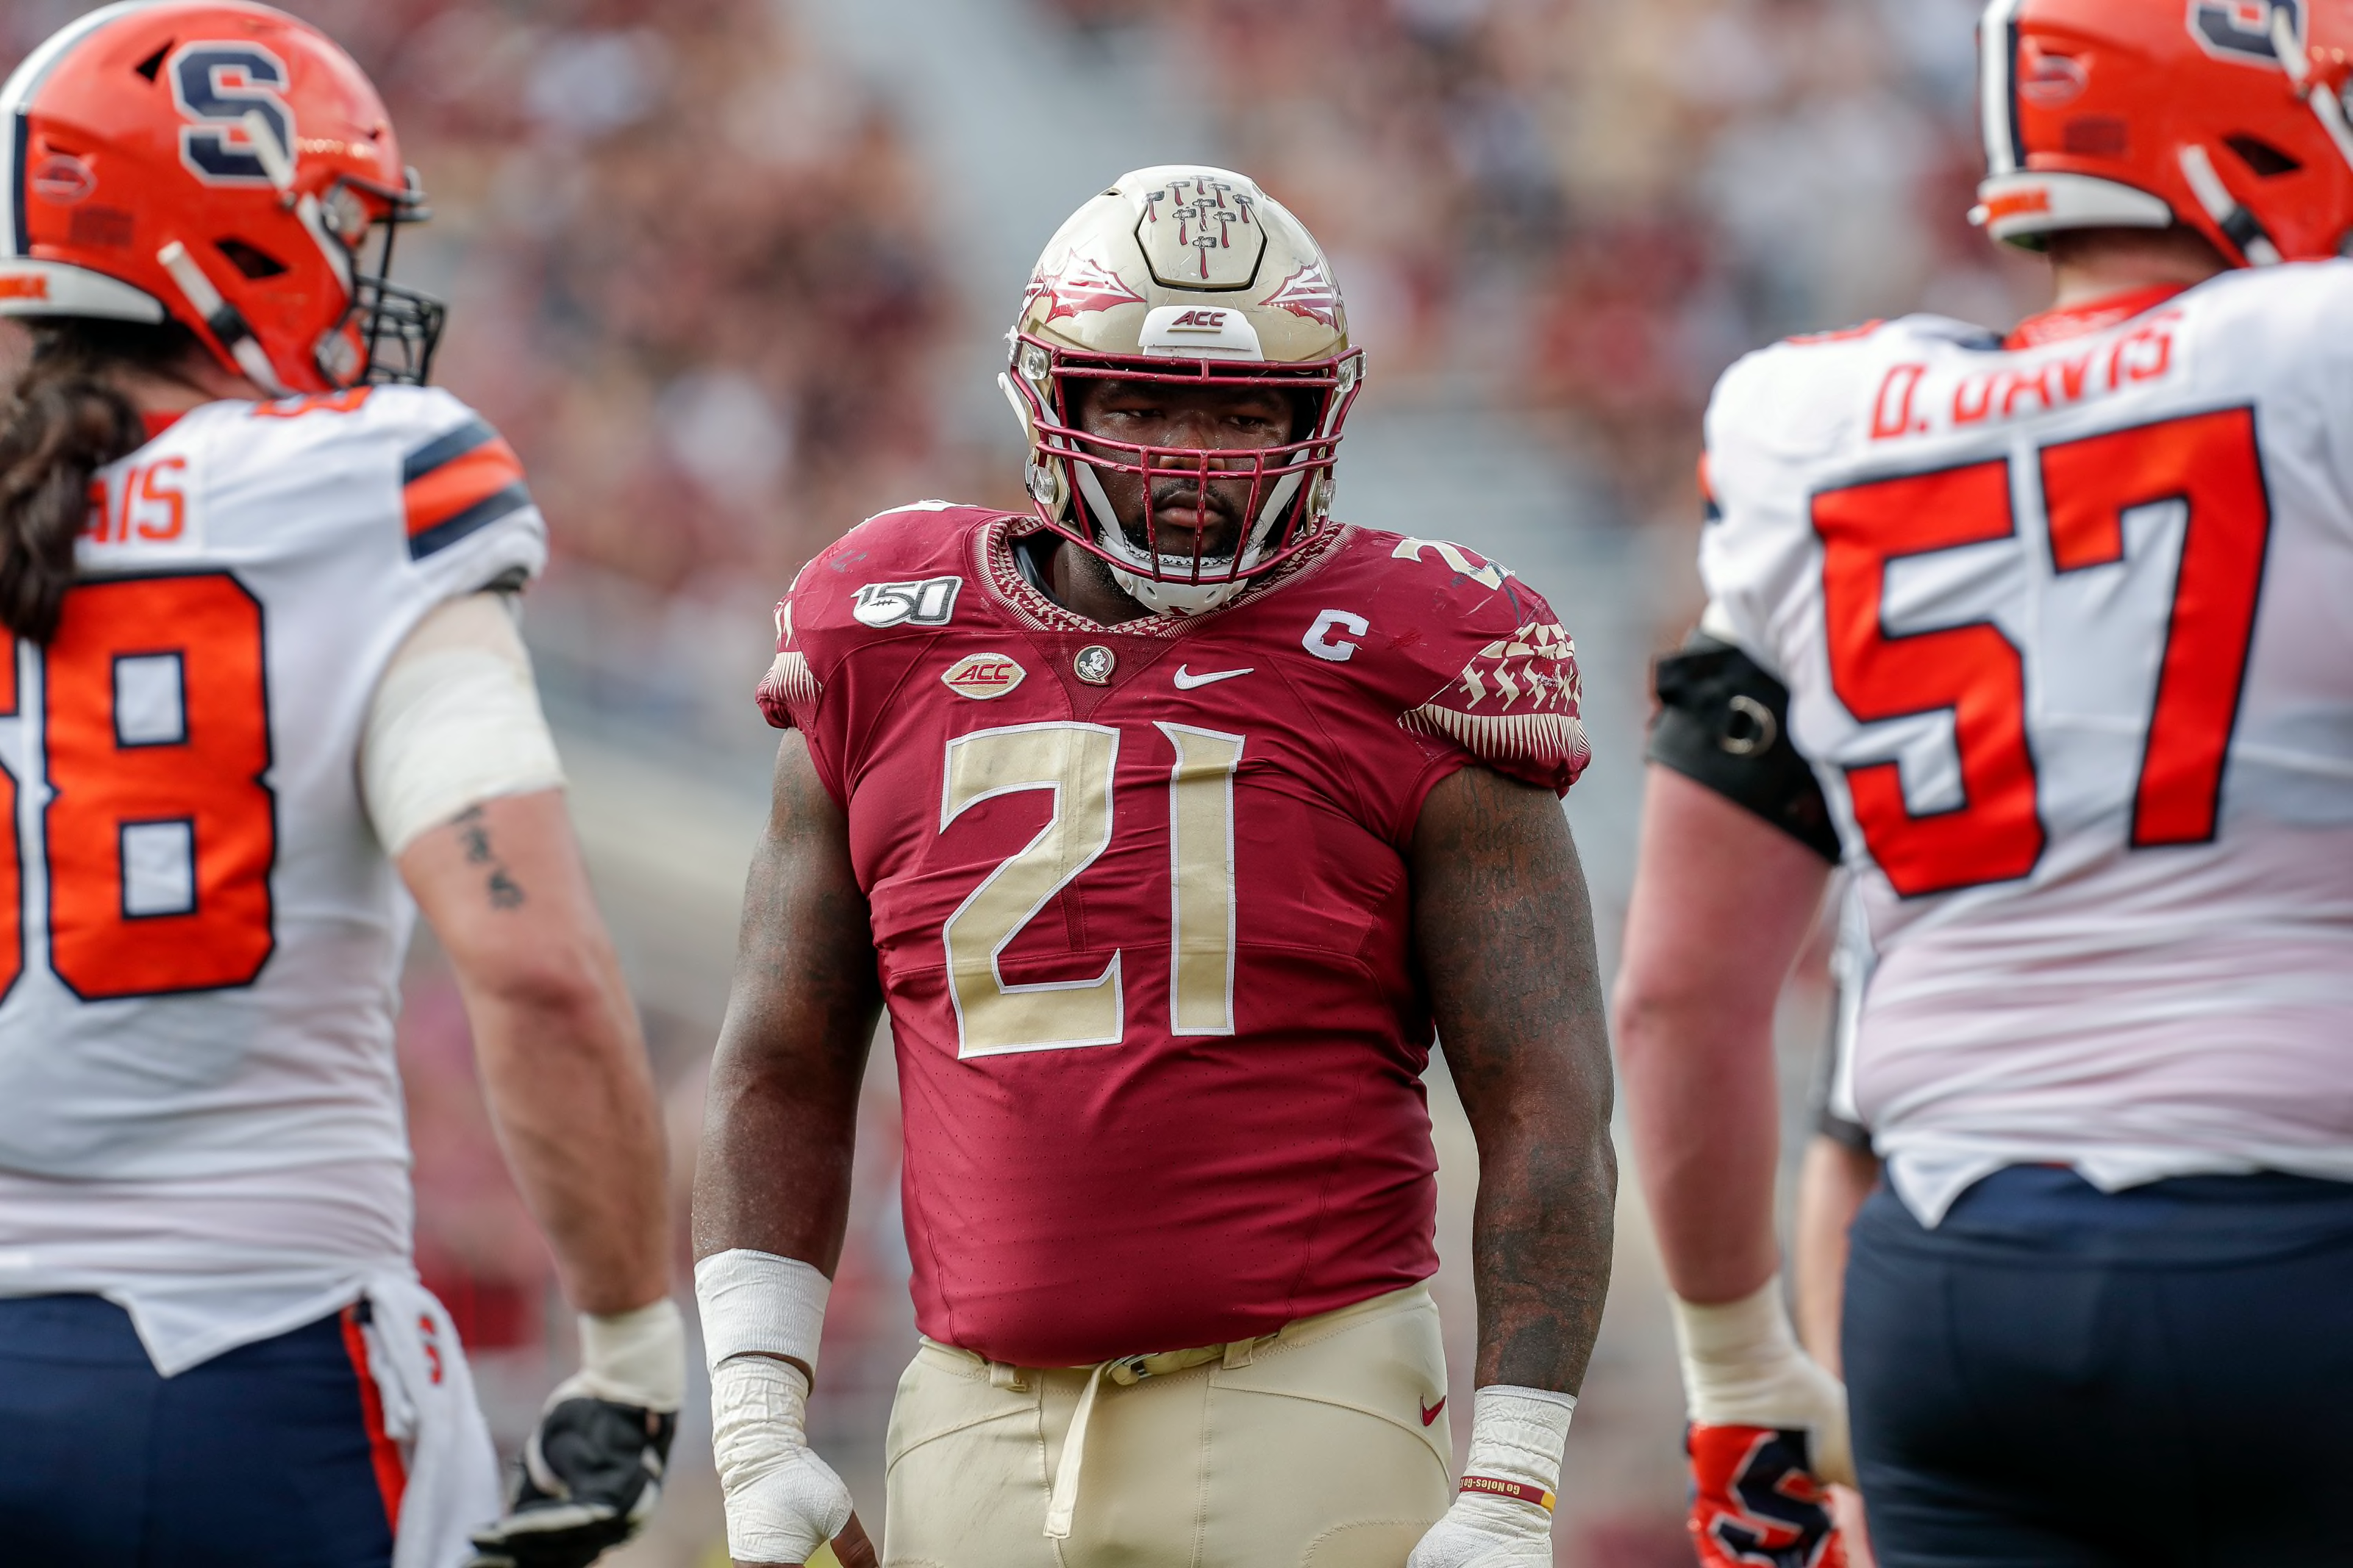 FSU Pro Day Which players increased their draft stock?